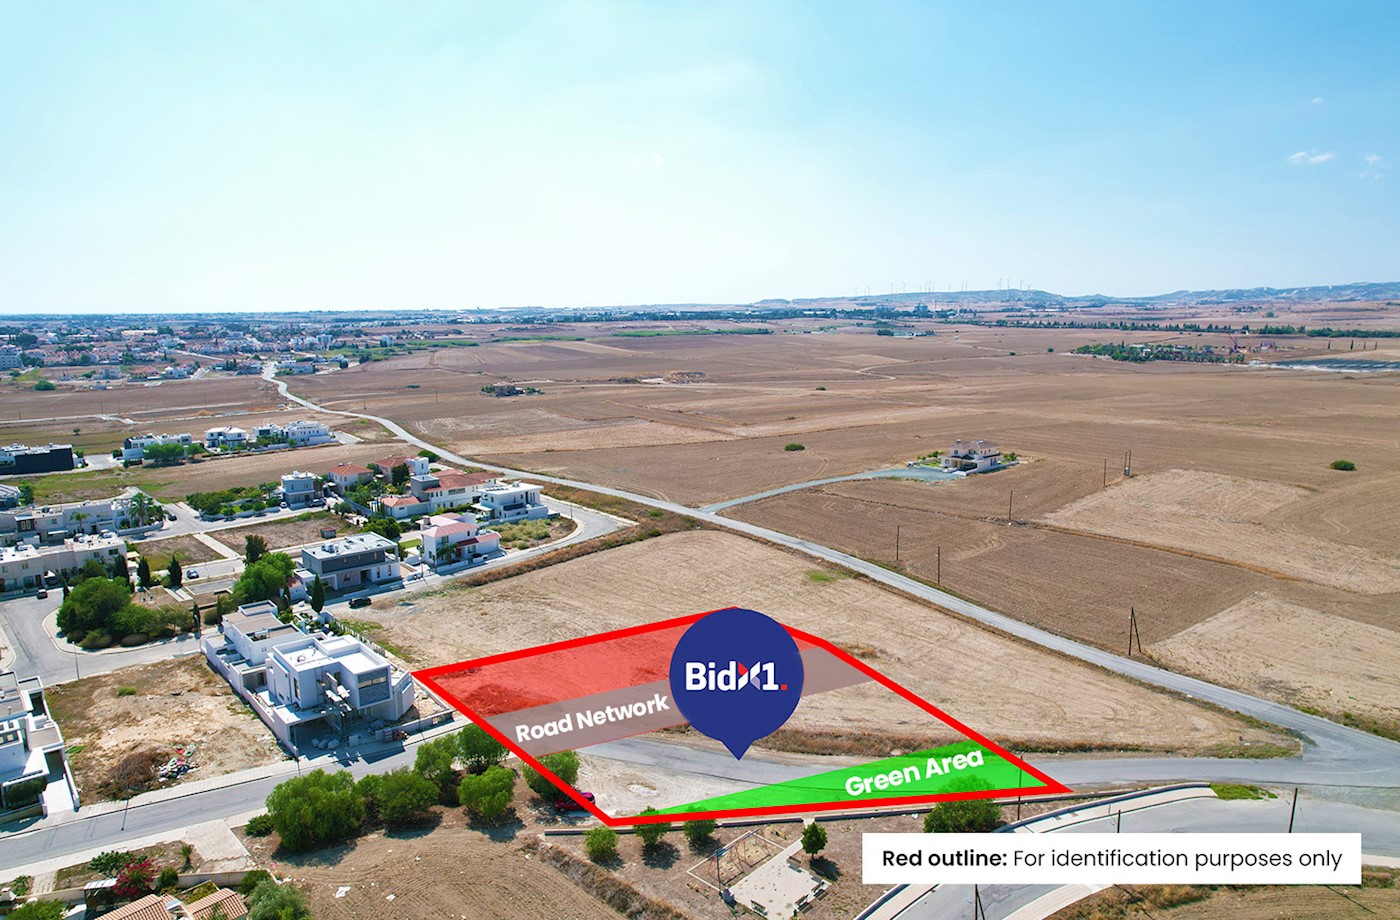 Share of Residential field in Aradippou, Larnaca 1/3